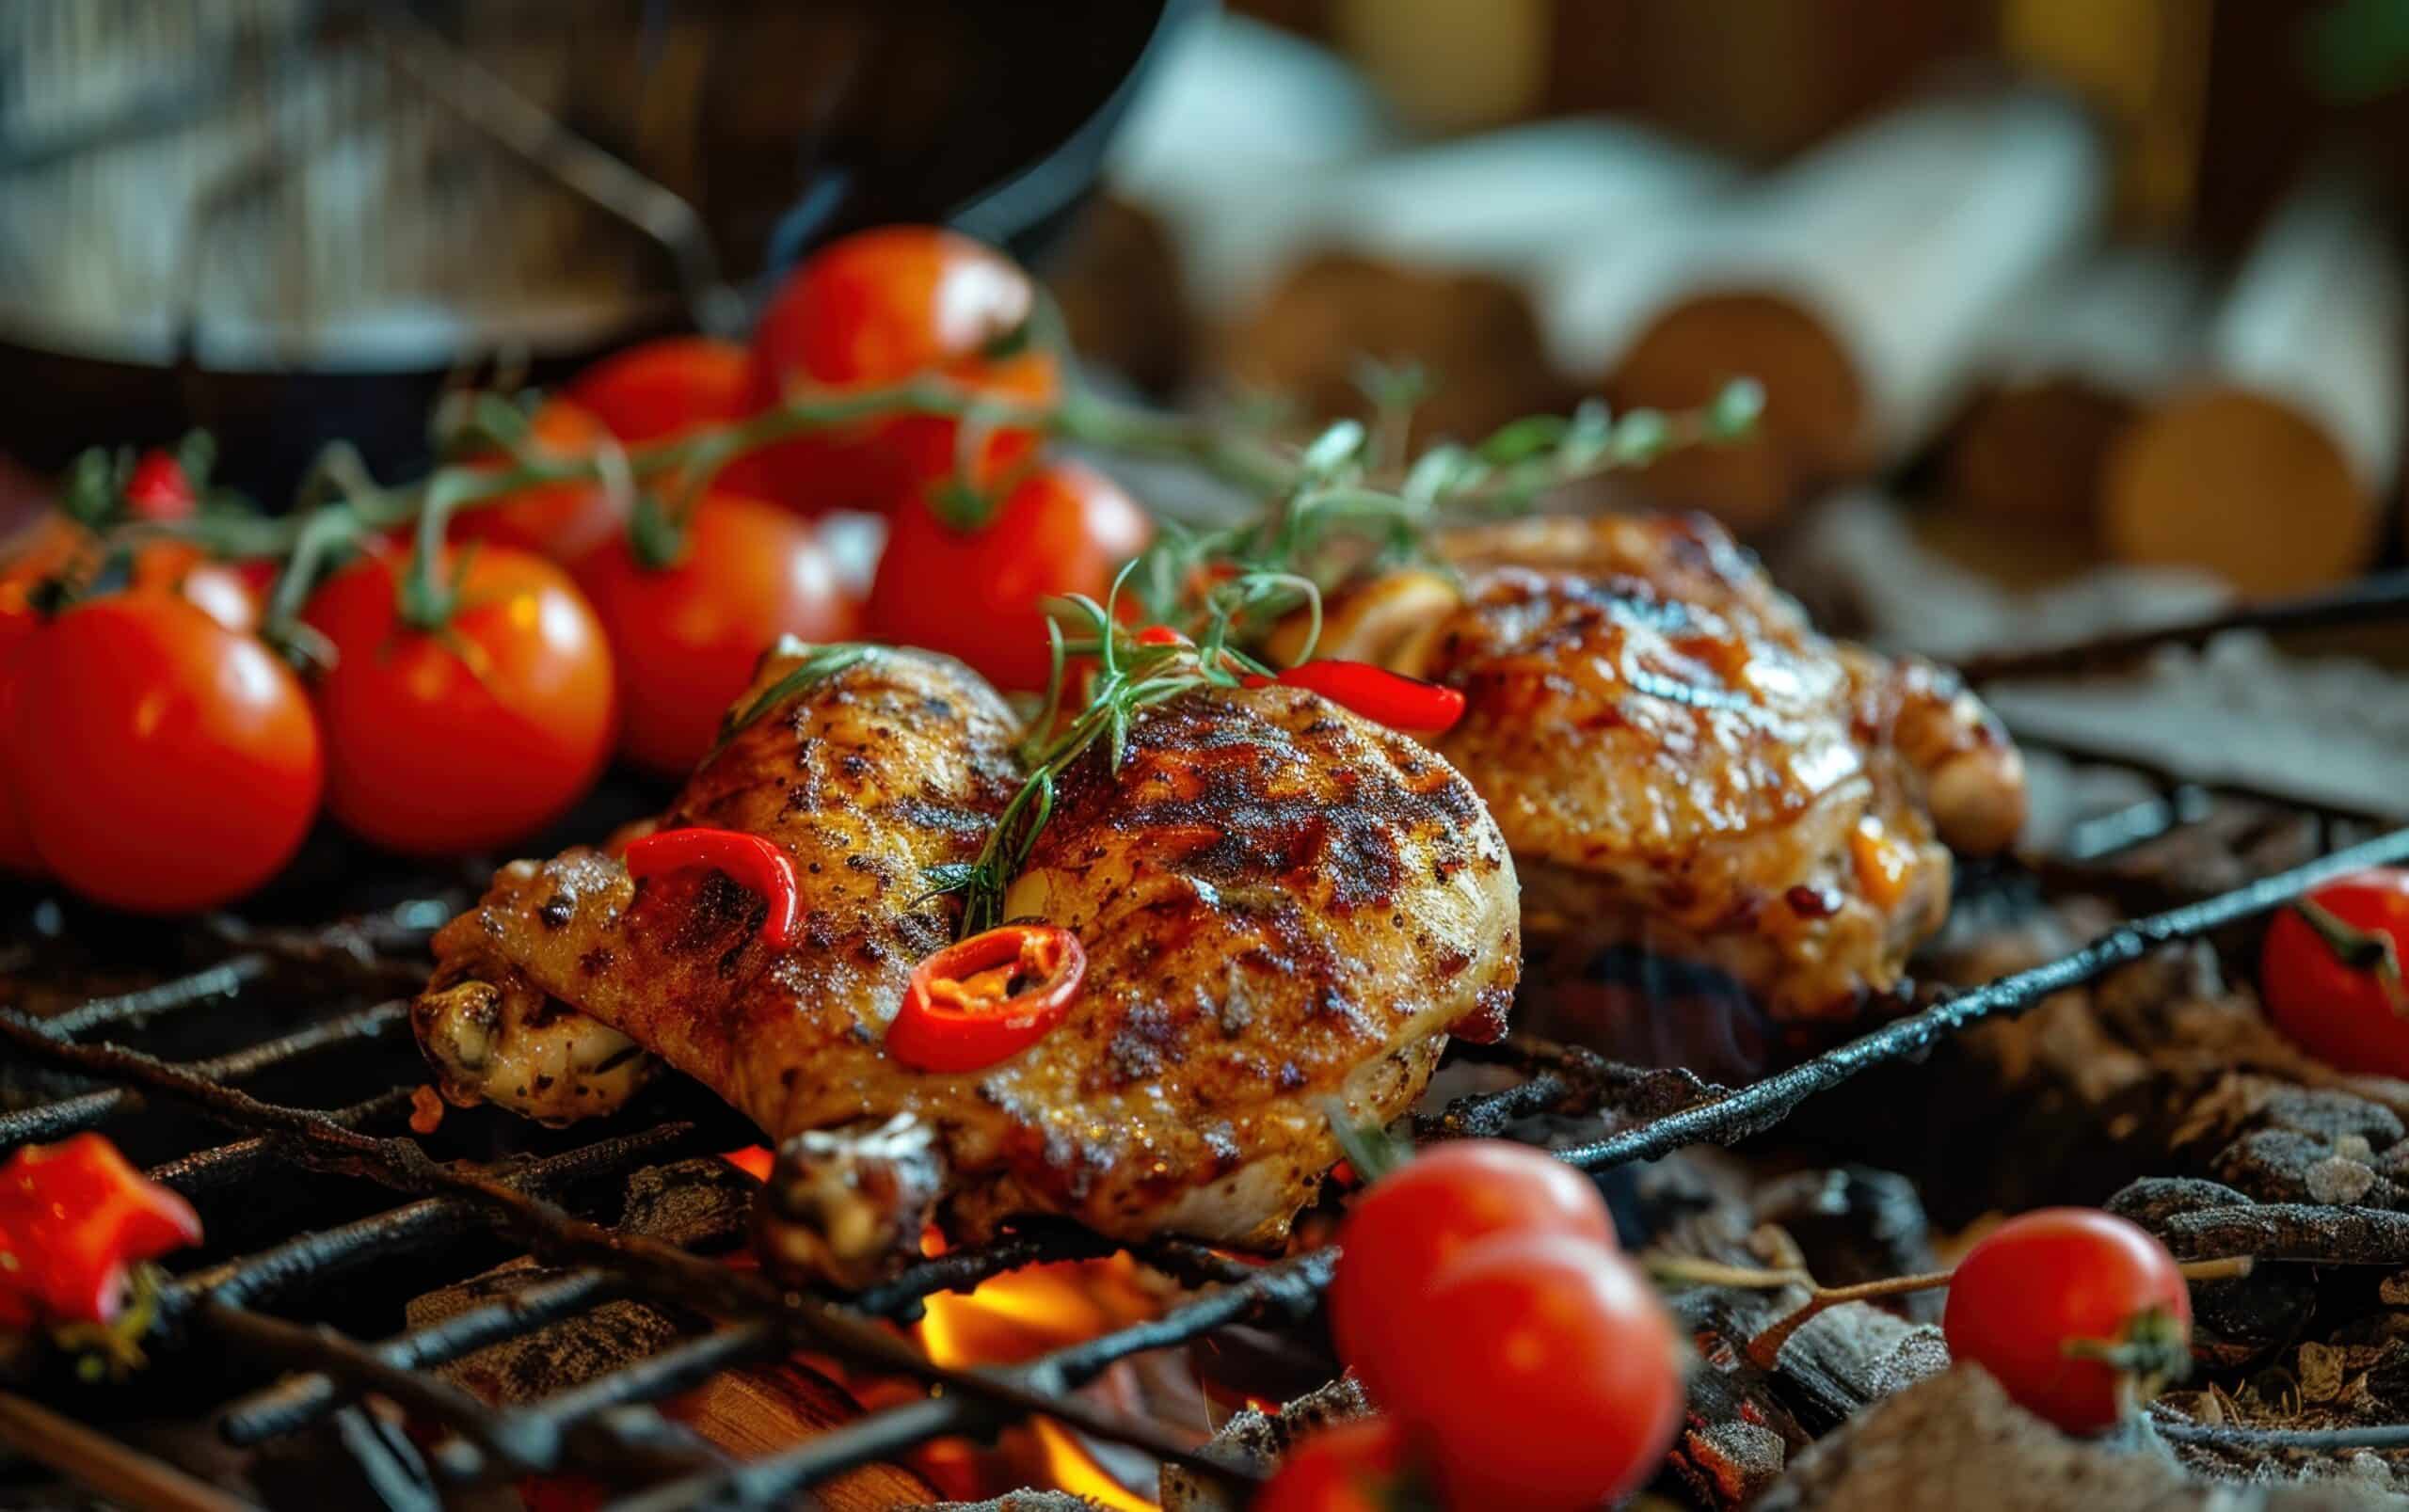 www.appr.com : How To Grill Chicken Thighs On Gas Grill?